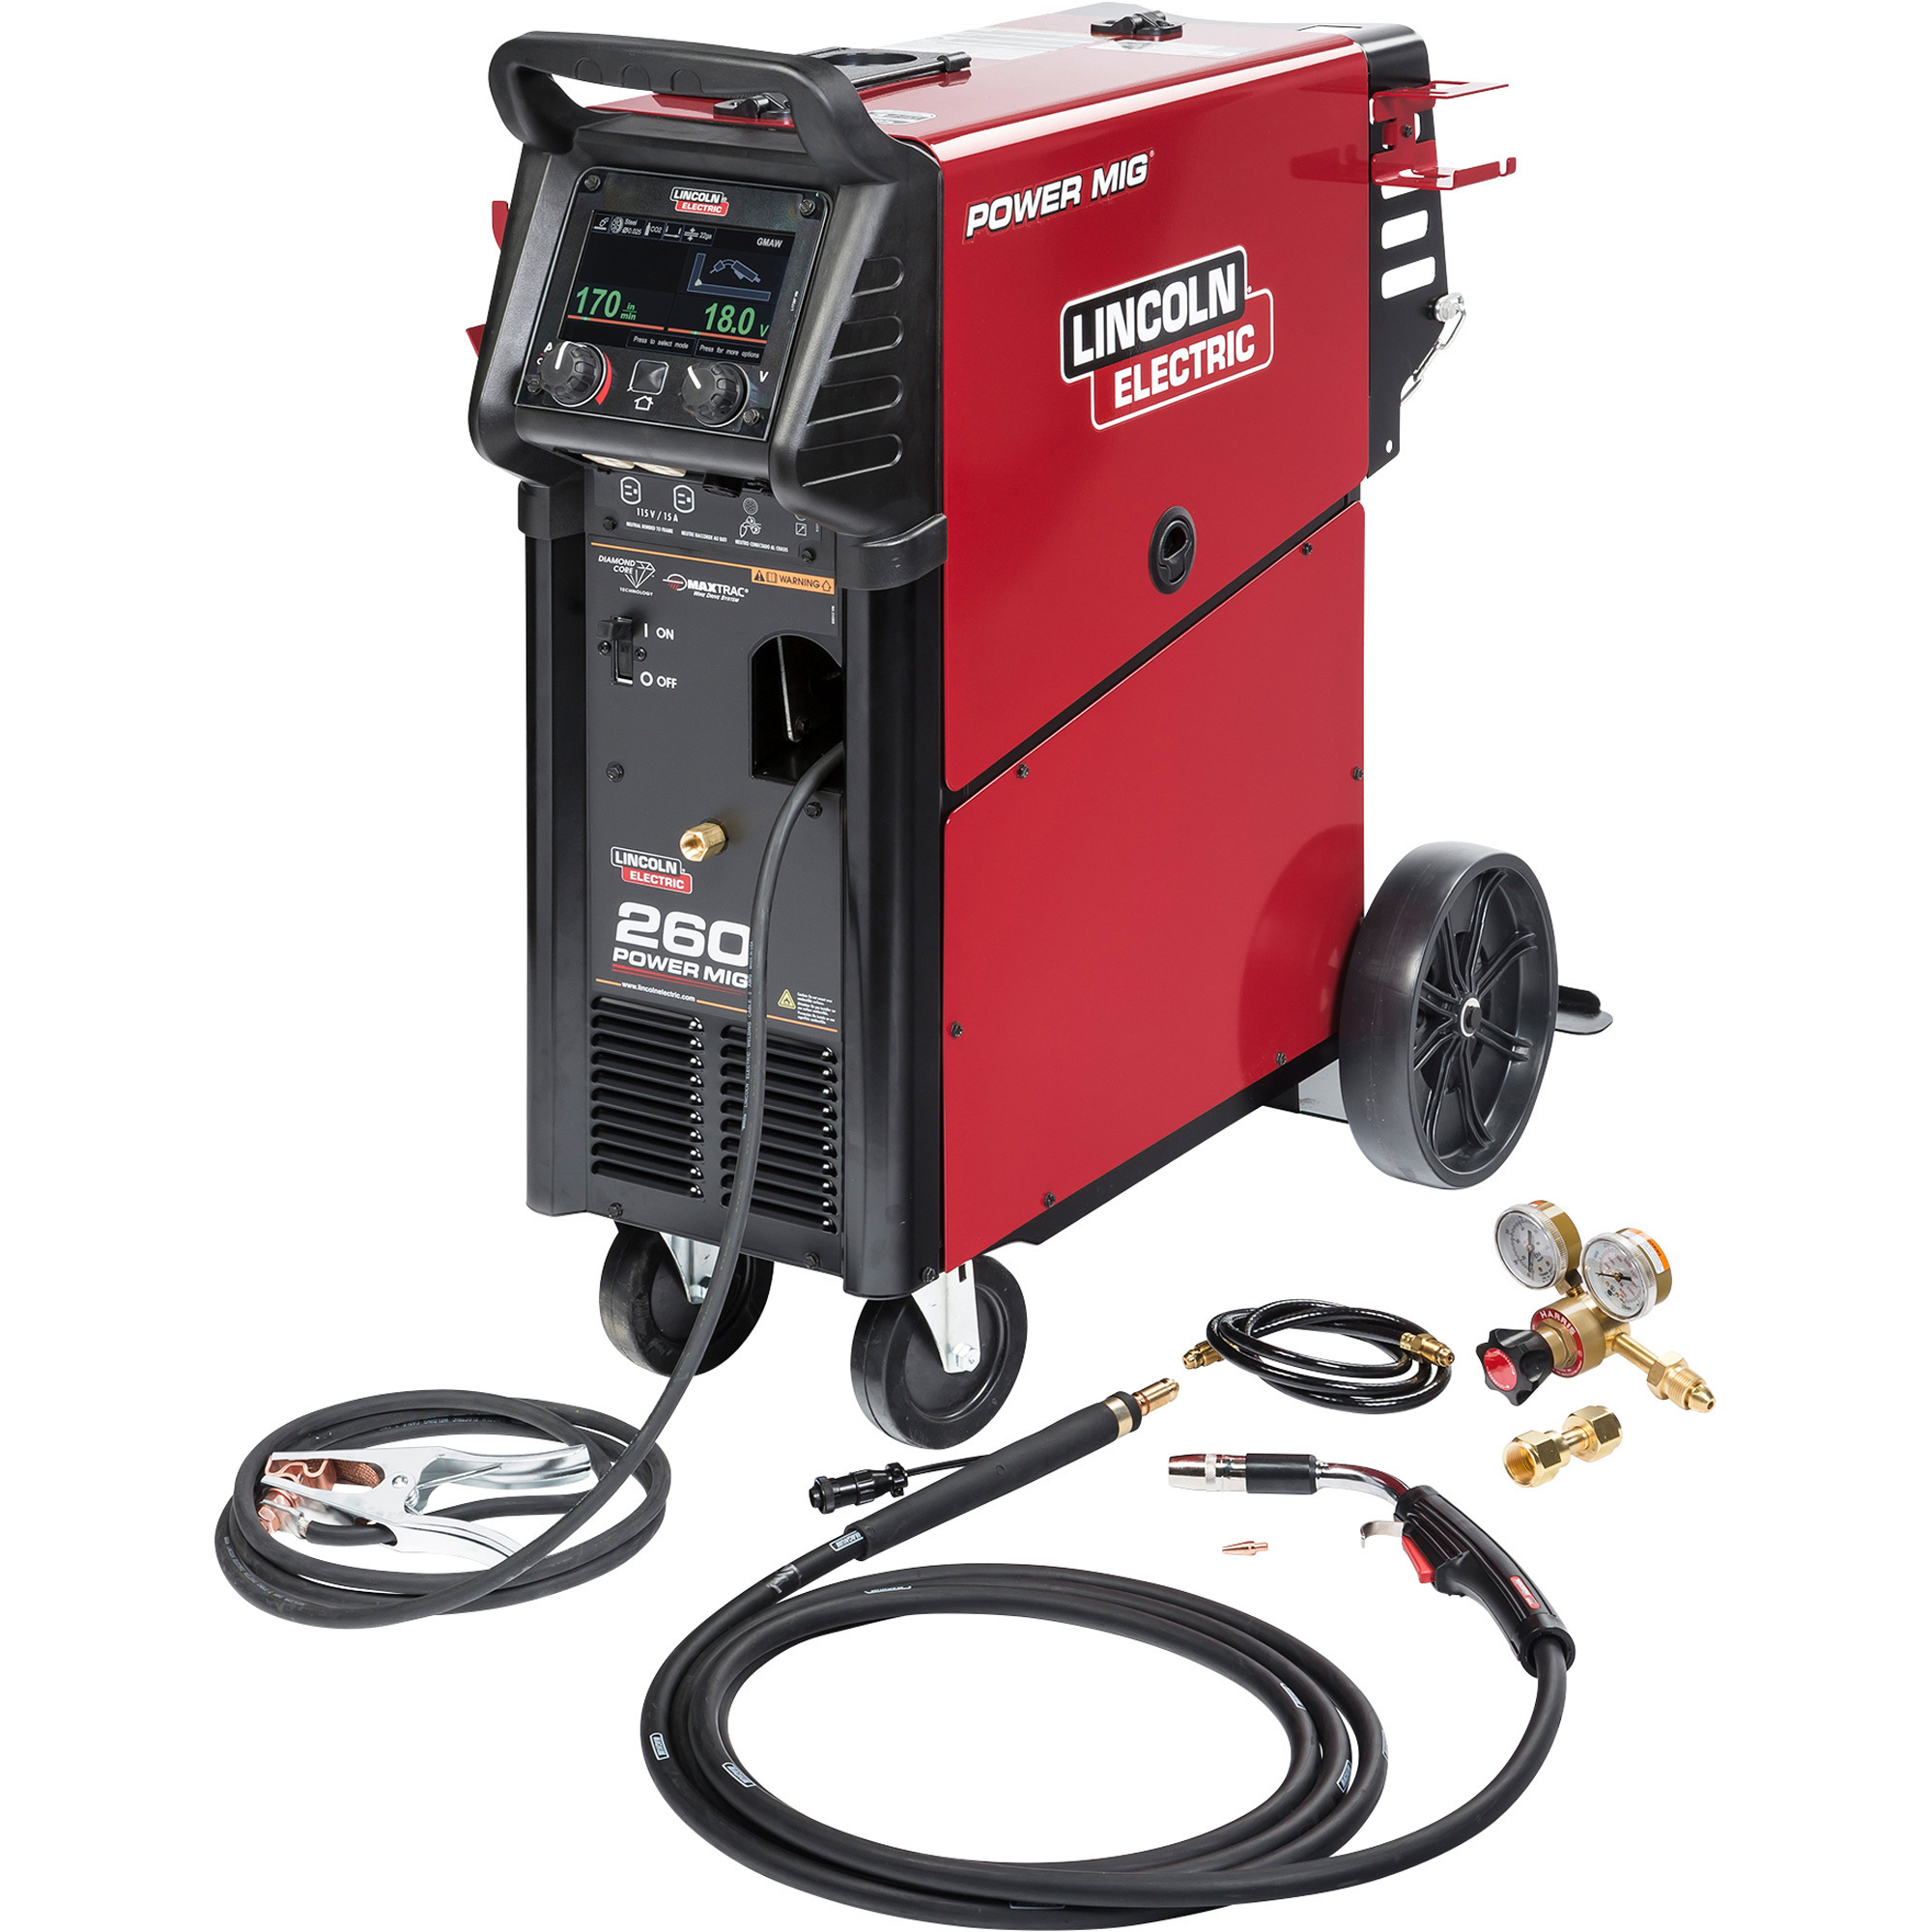 Power MIG 260 Flux-Core/MIG Welder with Cart — 208/230/460/575V, 30–300 Amp Output, Model - Lincoln Electric K3520-1